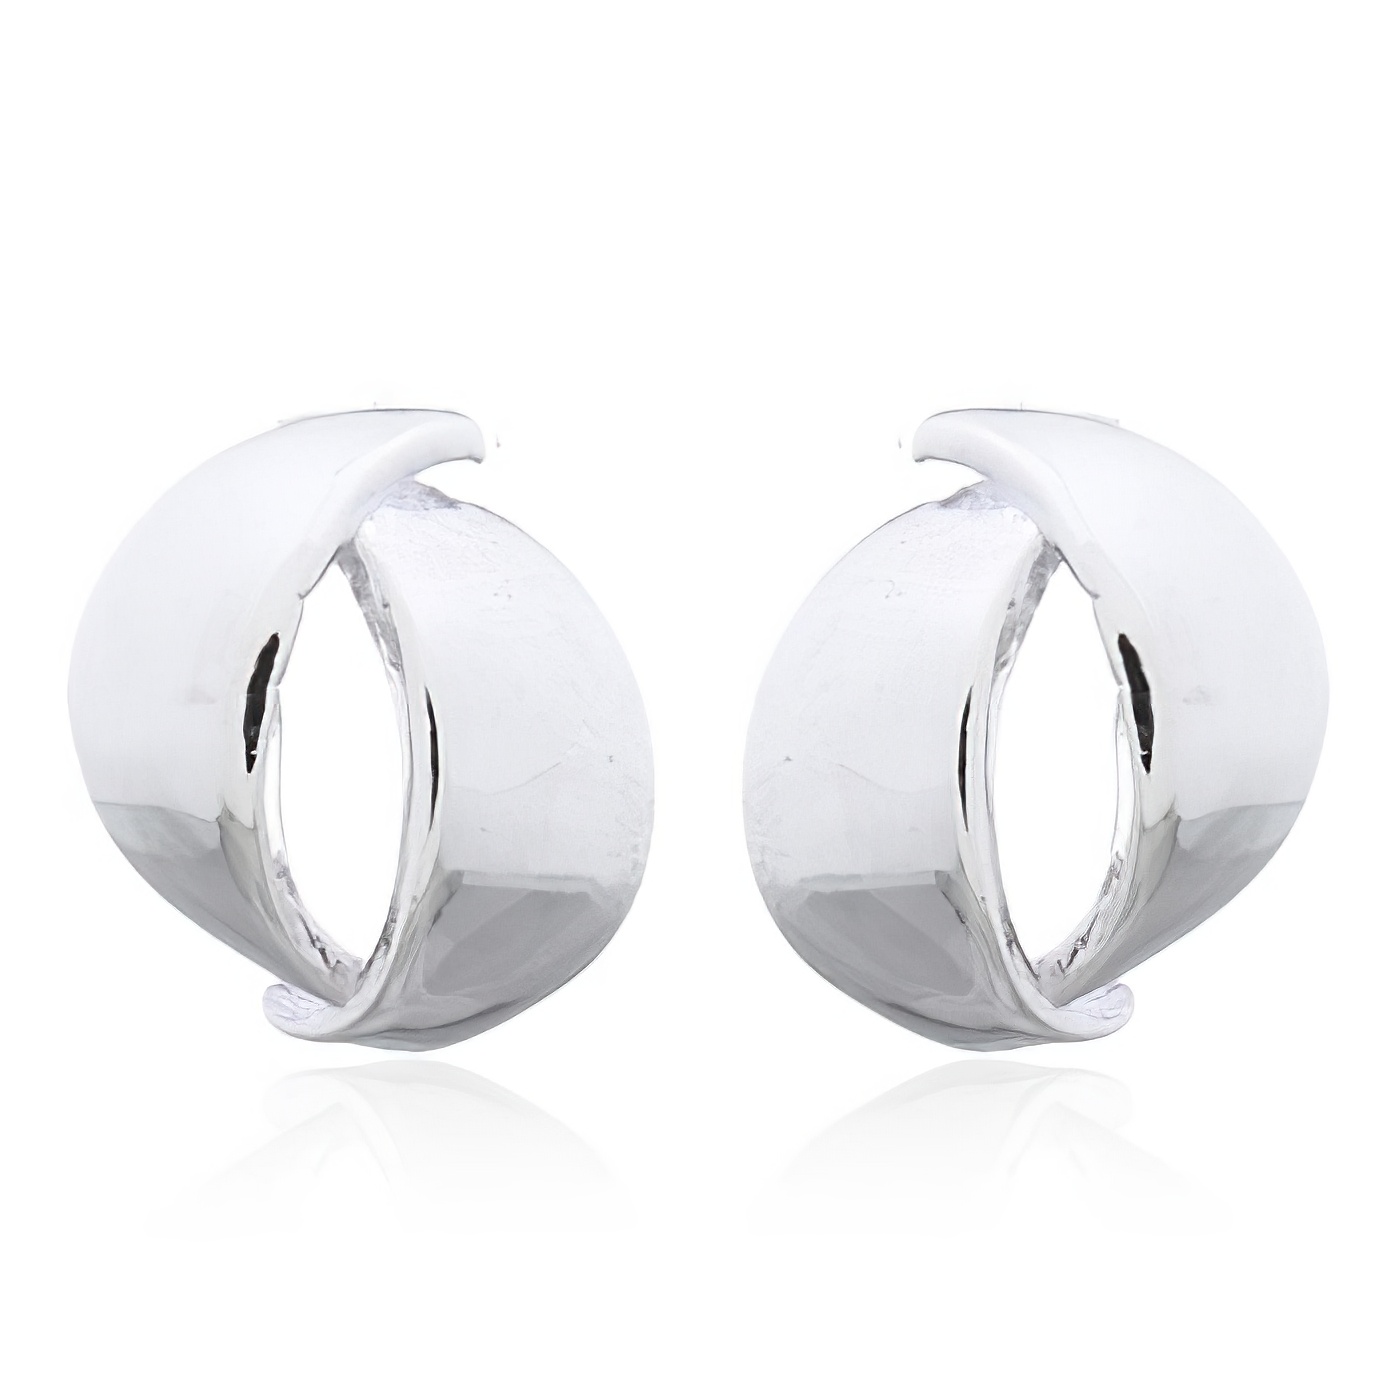 Entwined Classic 925 Sterling Silver Stud Earrings by BeYindi 